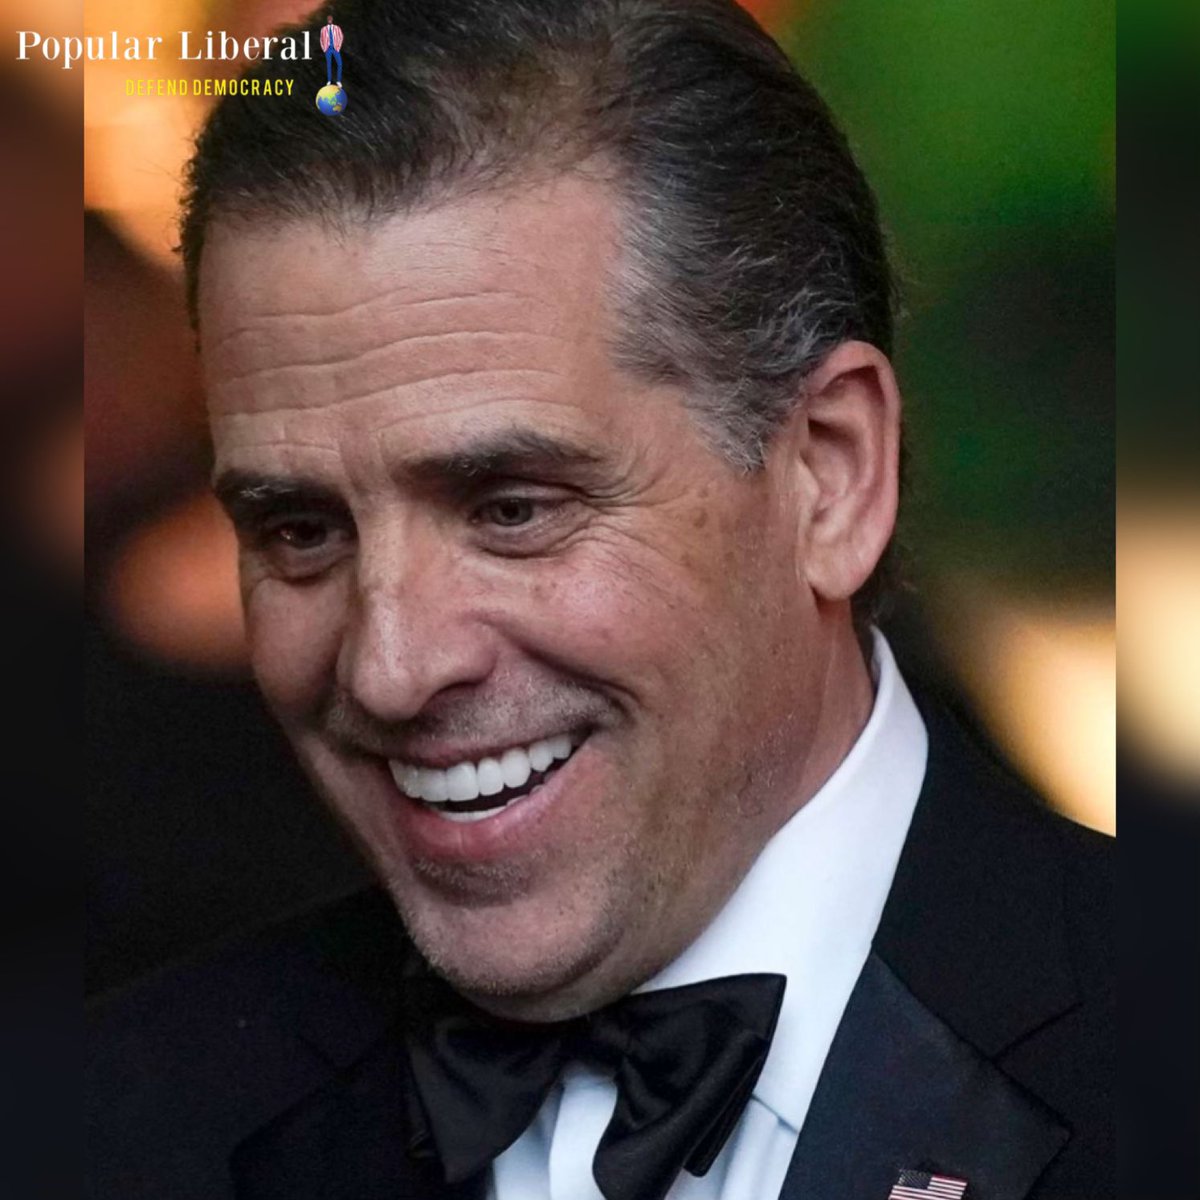 FUN FACTS: Hunter Biden has more evidence to support the claim that Fox News is 'FRAUDS' than Jim Jordan and James Comer had regarding potential criminal charges for Hunter Biden.